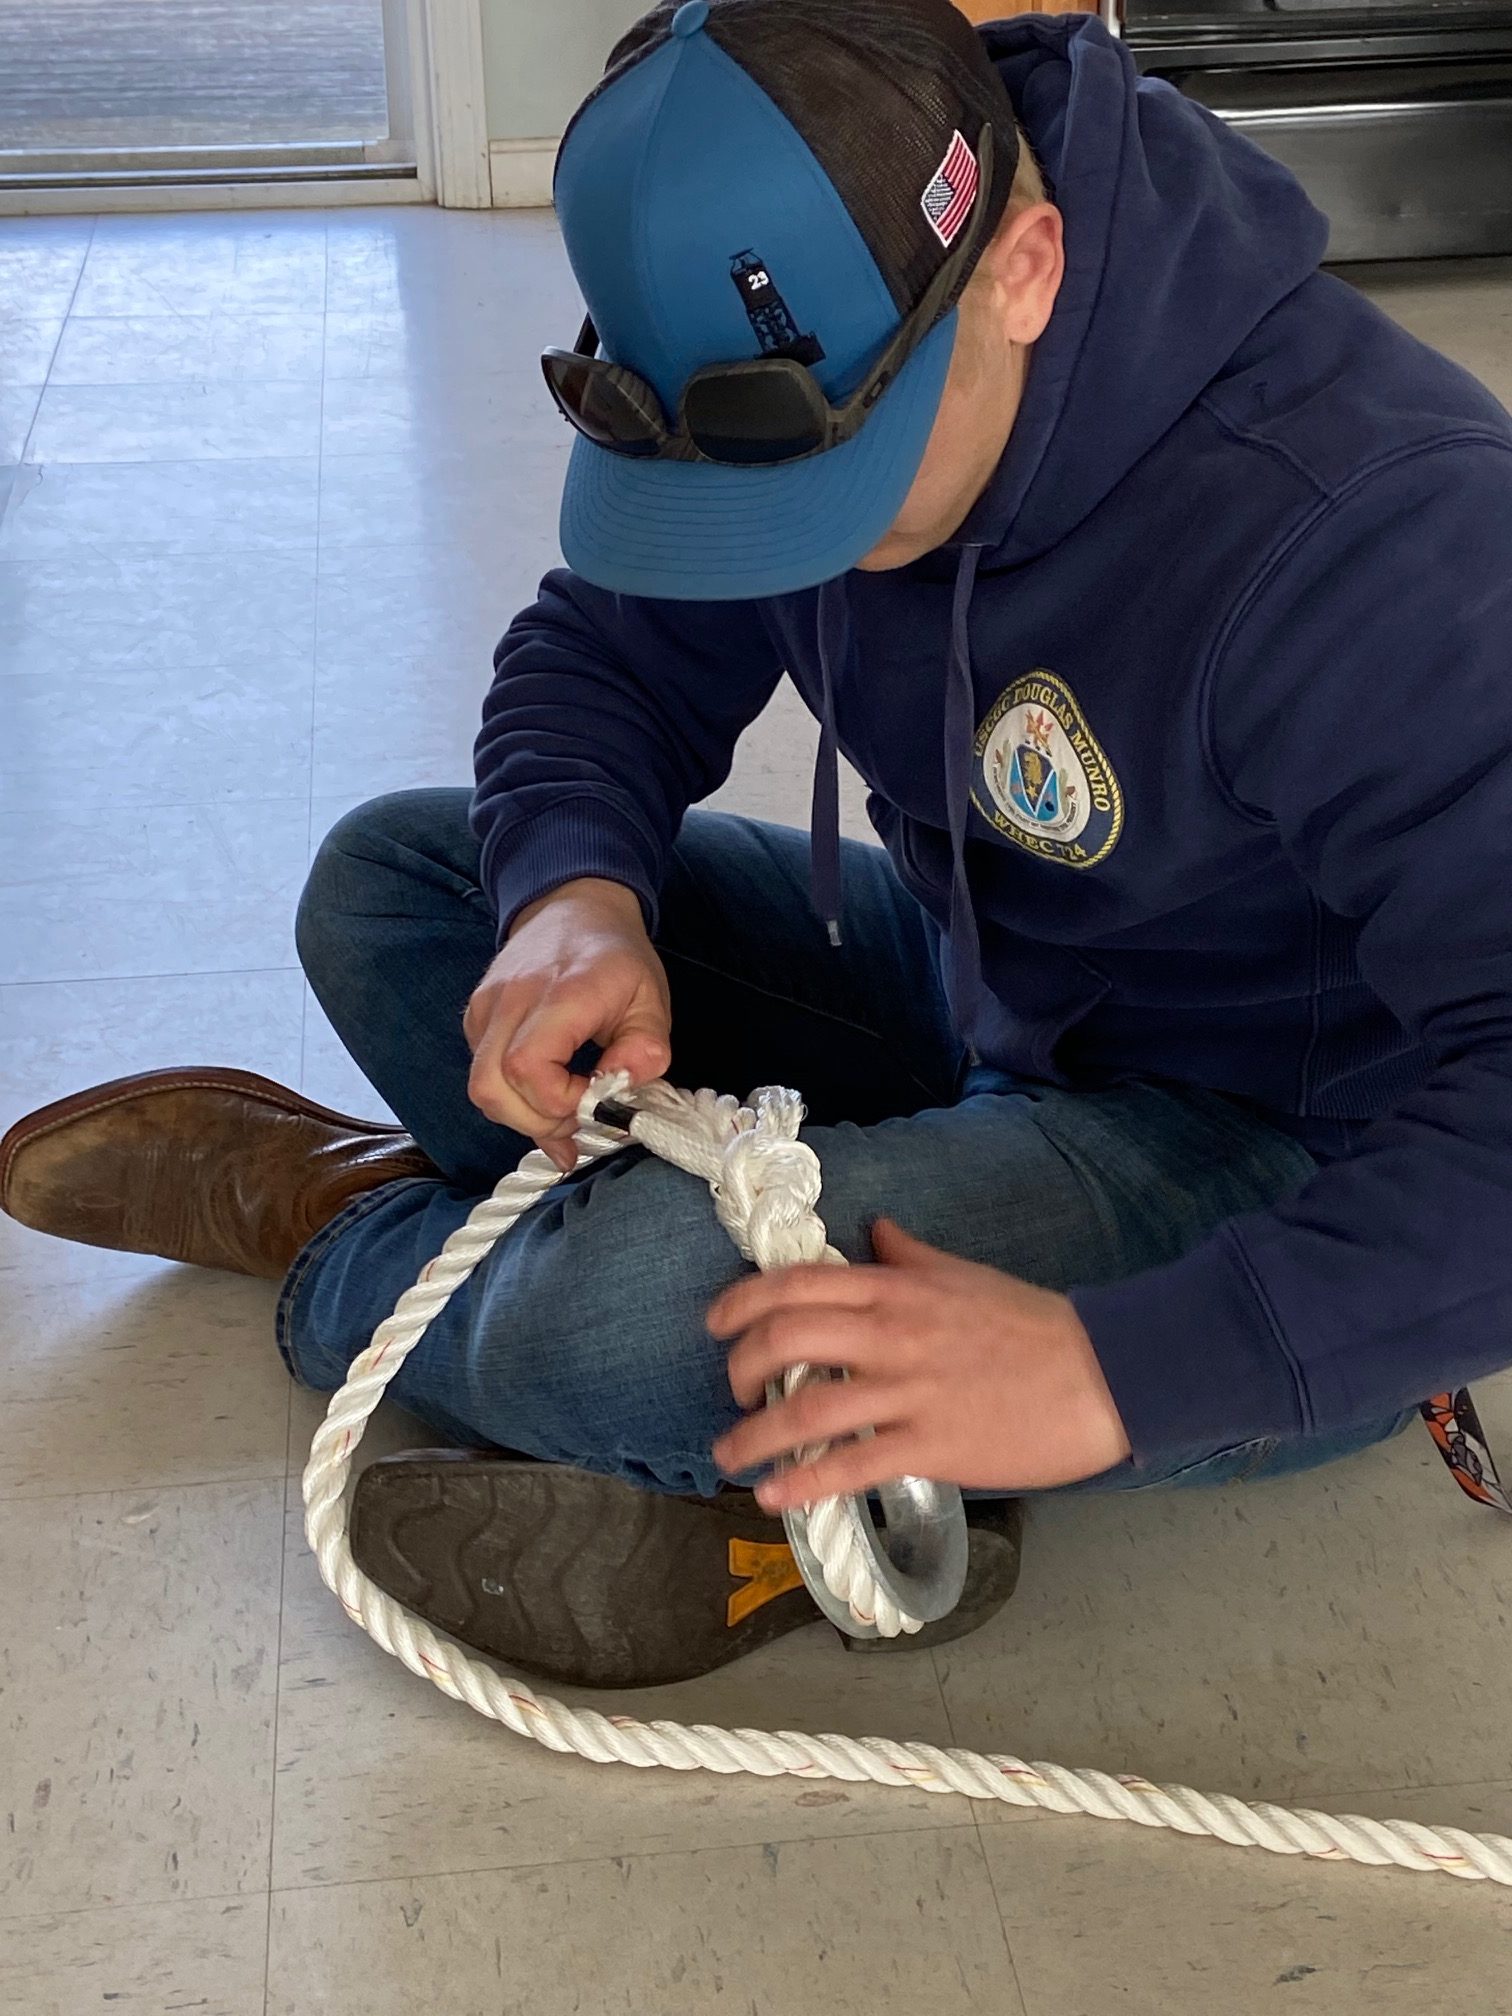 Splicing up rope